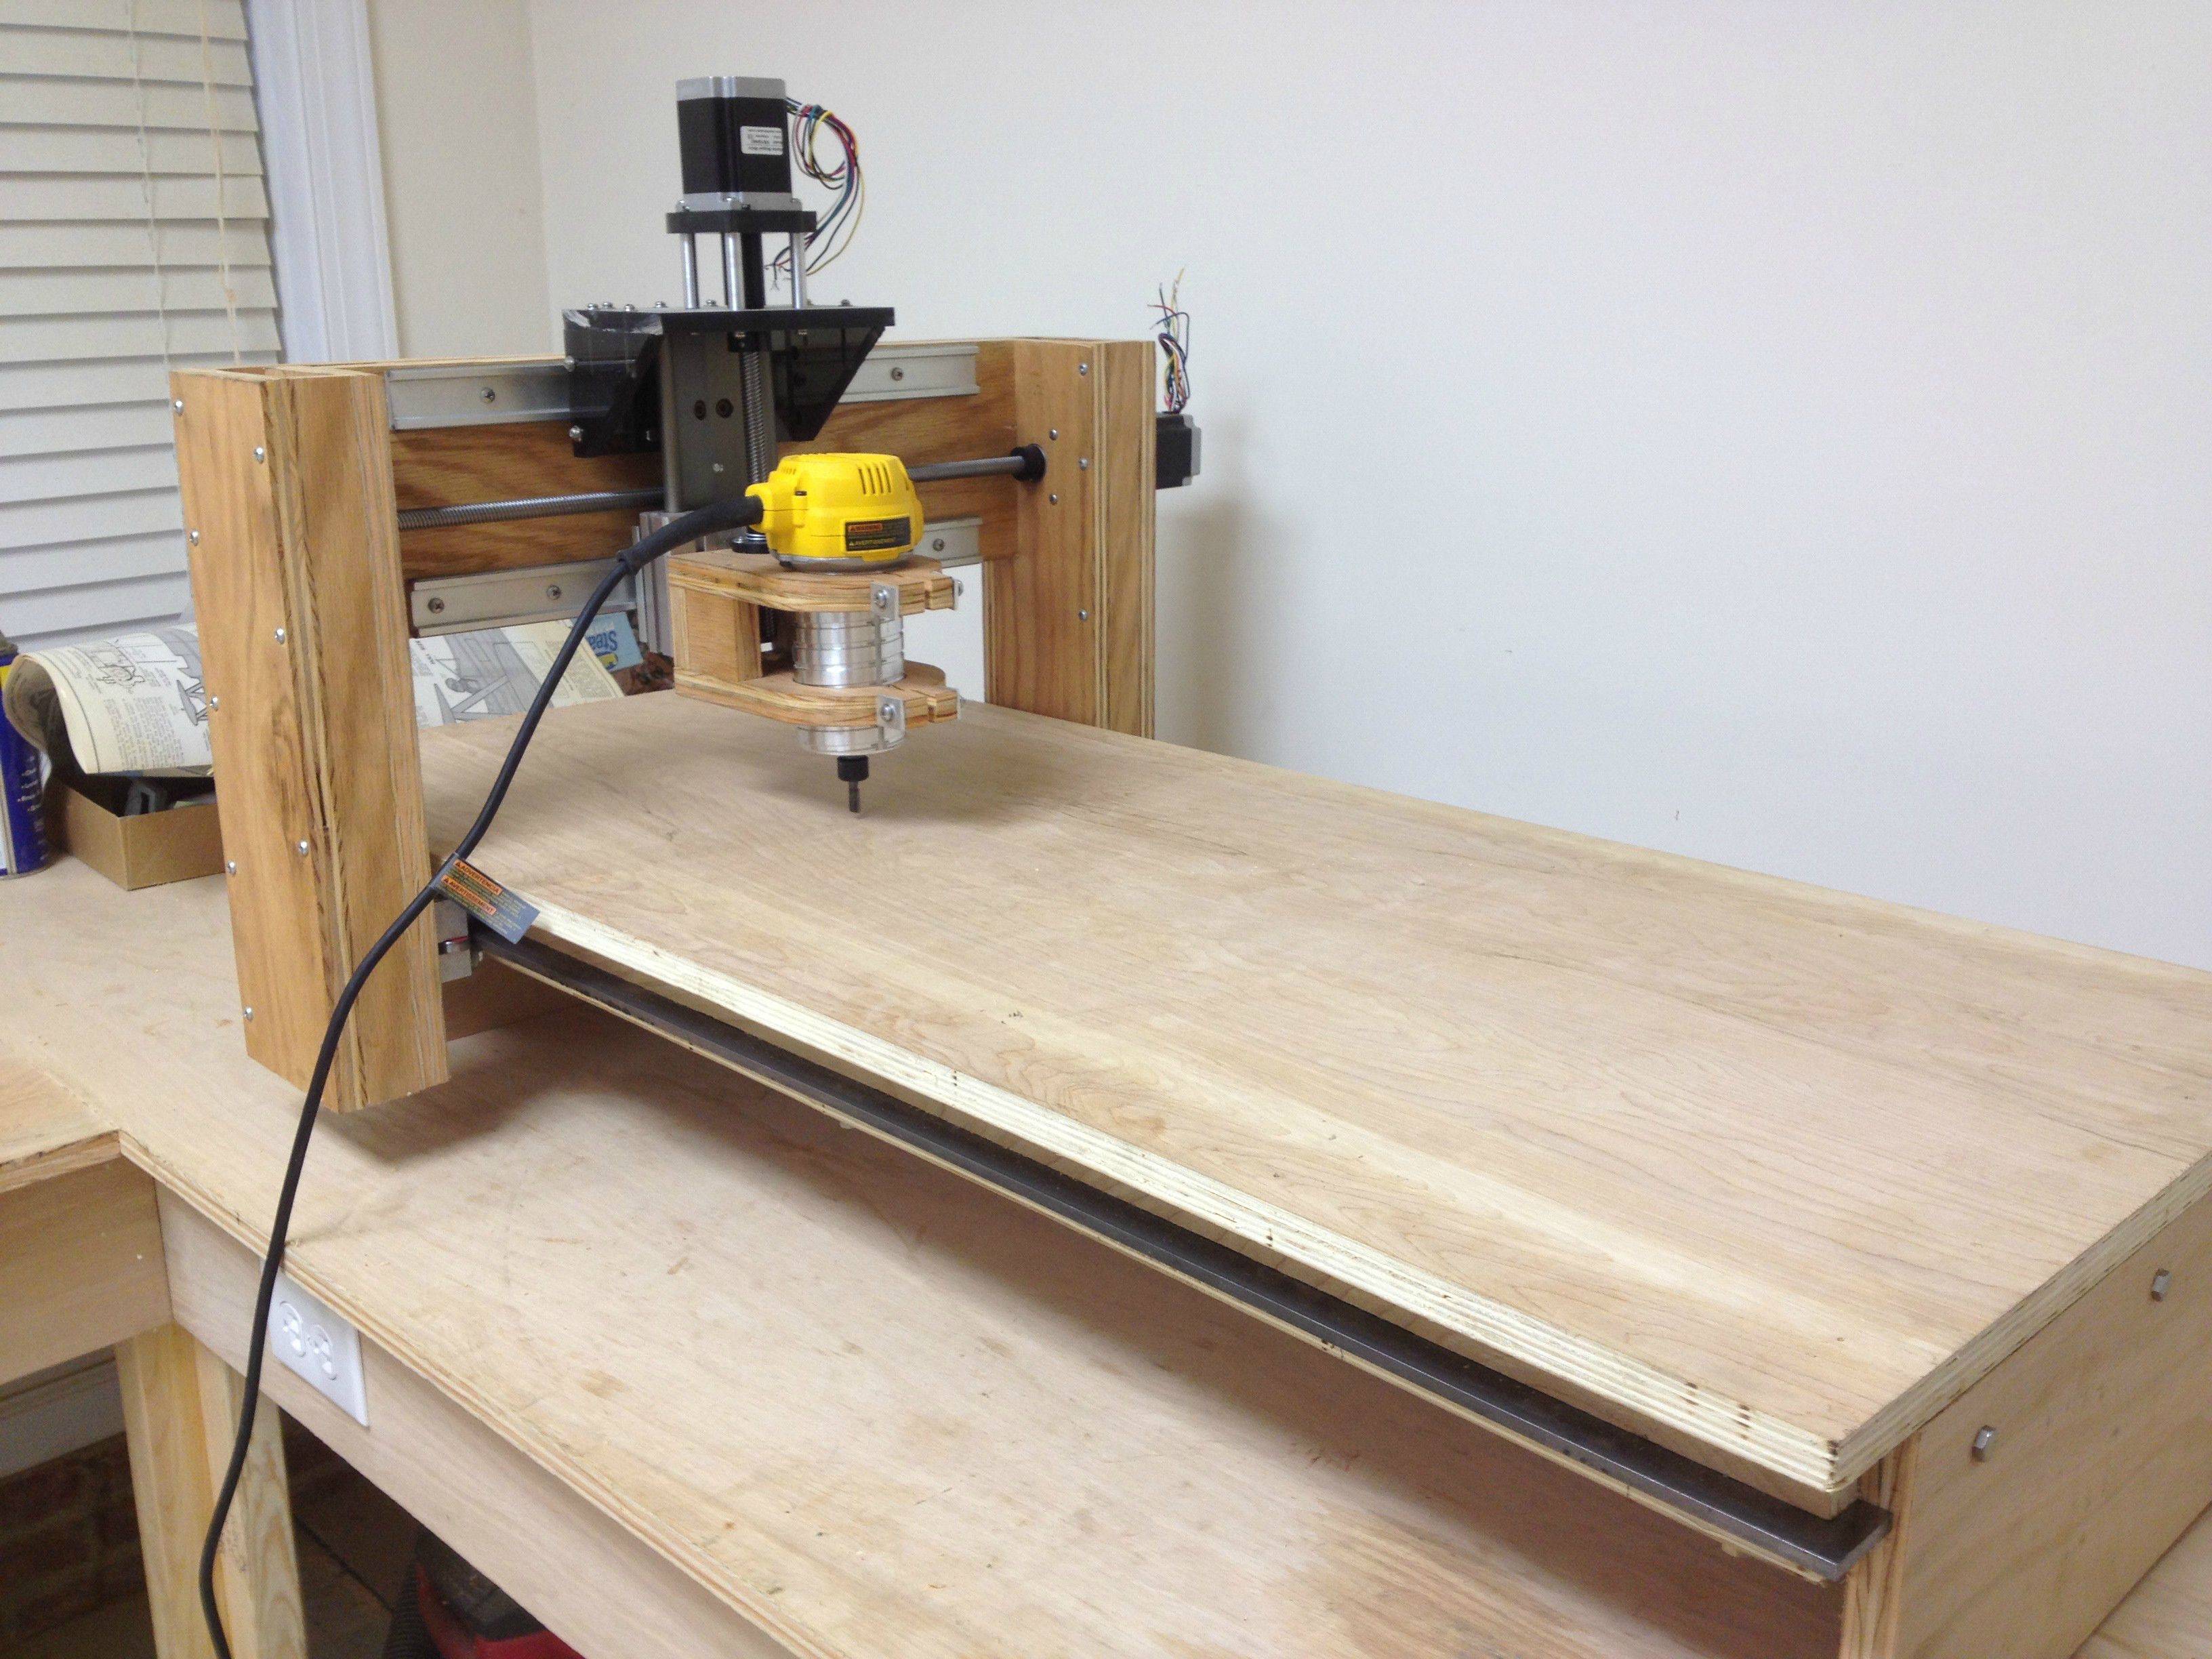 Woodworking how to build wood cnc router PDF Free Download